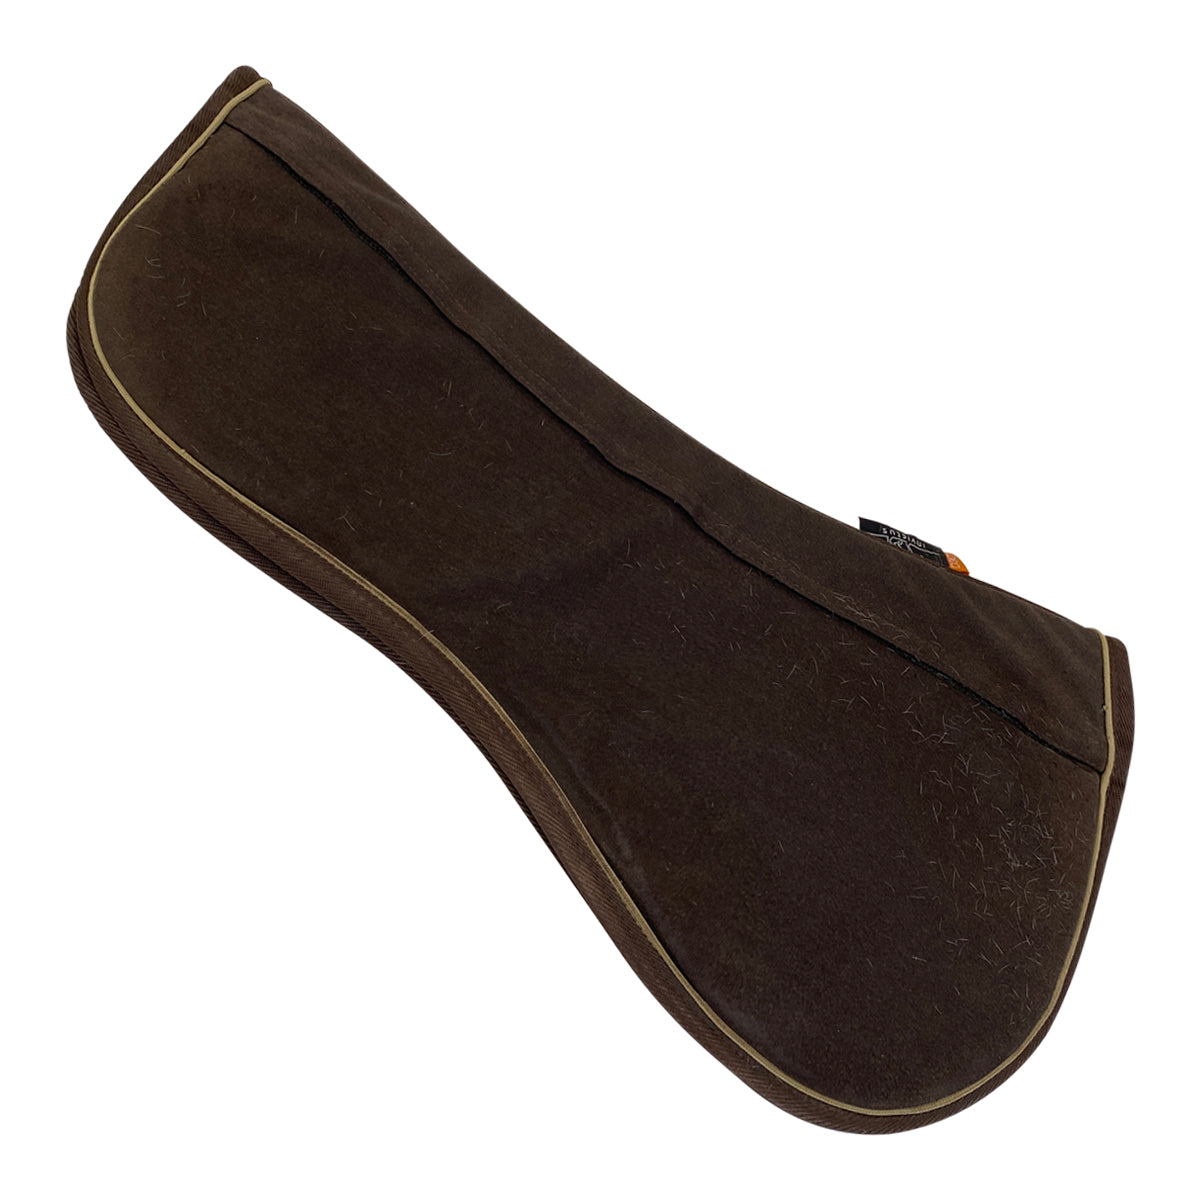 Invictus Equality Shimmable Half Pad in Brown